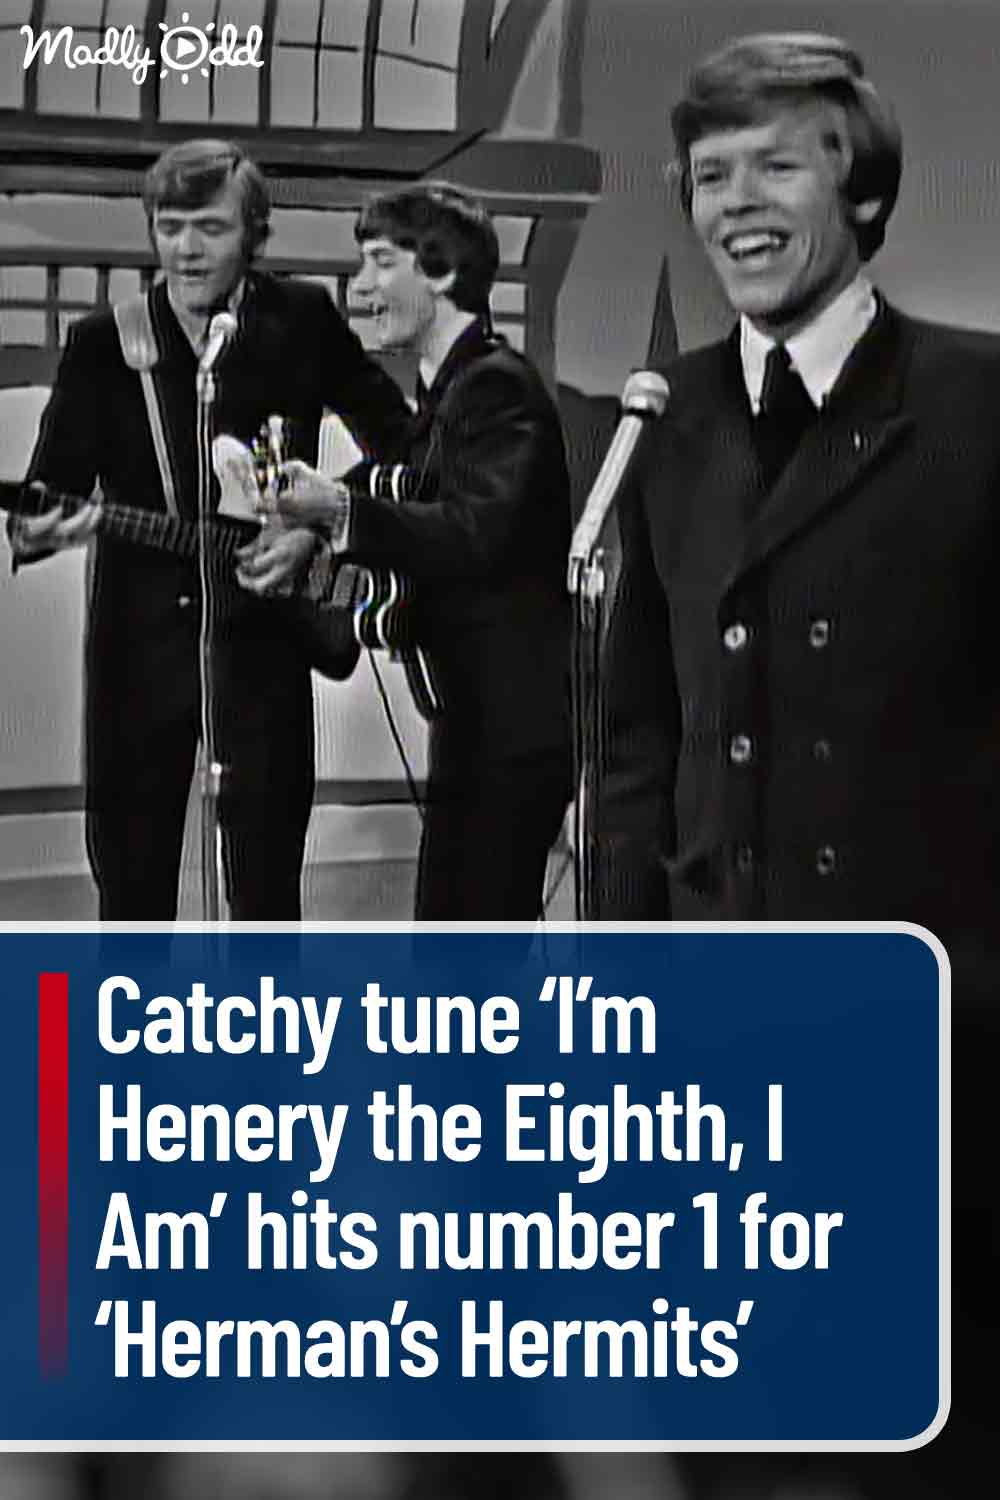 Catchy tune ‘I’m Henery the Eighth, I Am’ hits number 1 for ‘Herman’s Hermits’